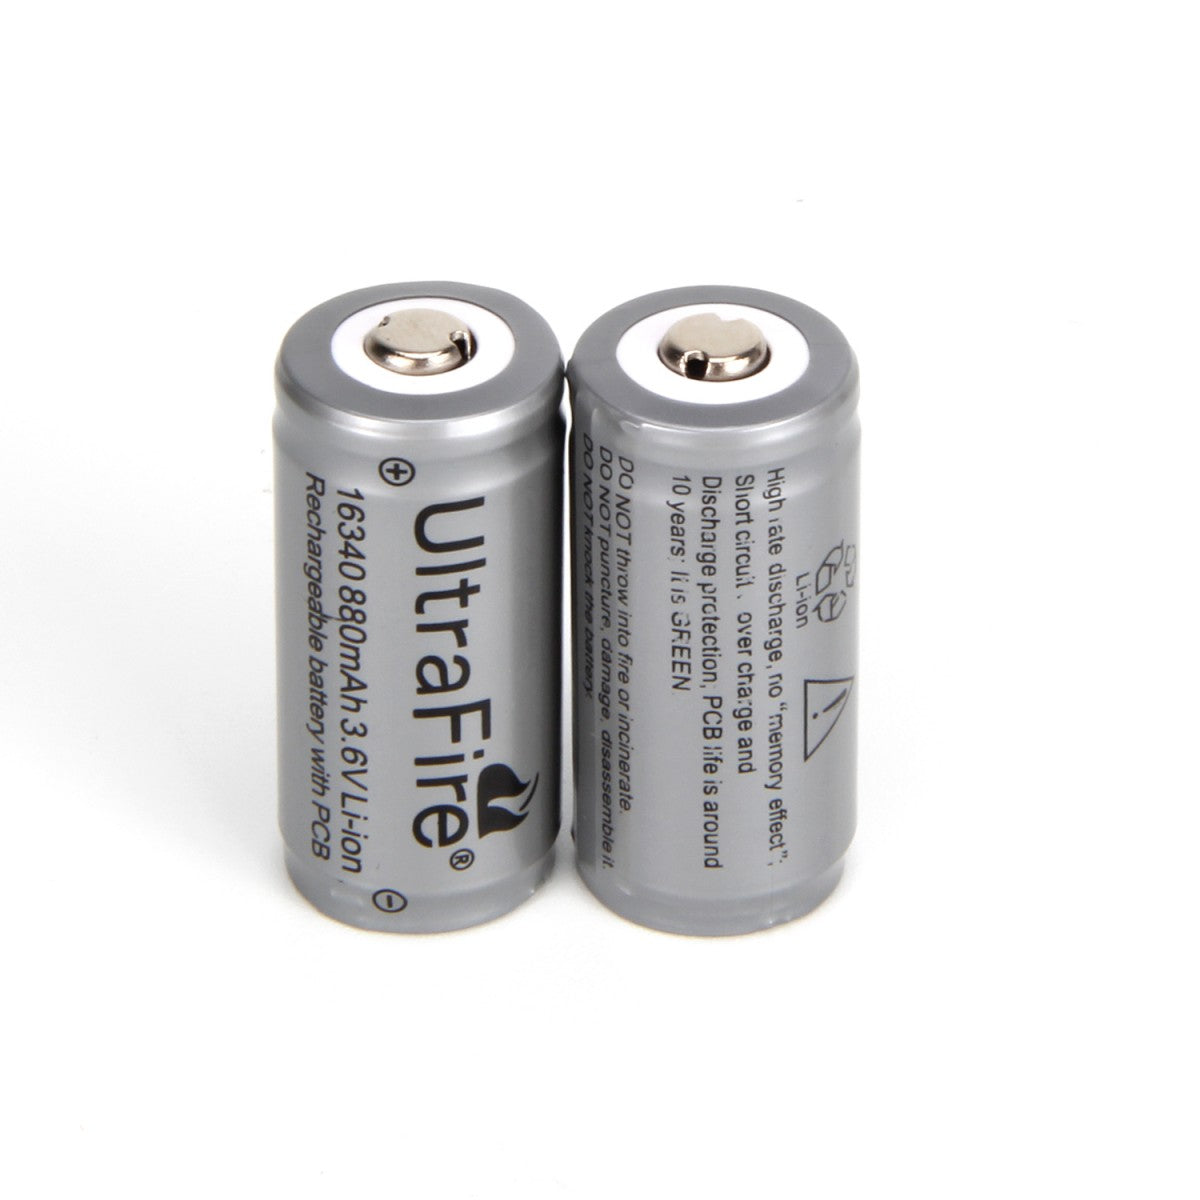 UltraFire 880mAh Rechargeable Lithium Battery With